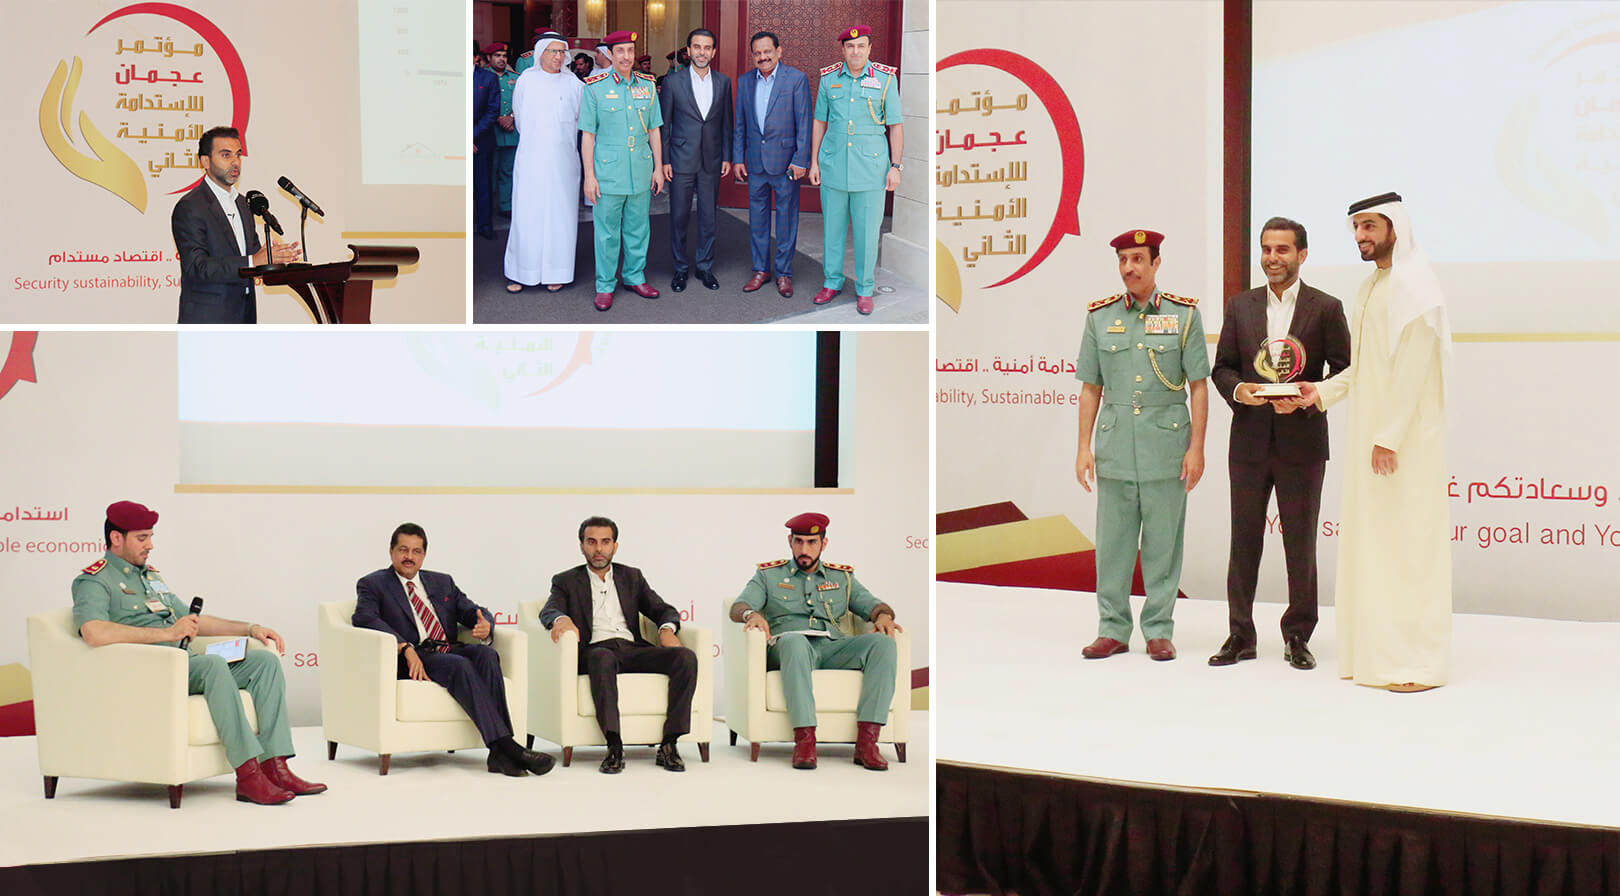 Ajman Second Security Sustainability Conference